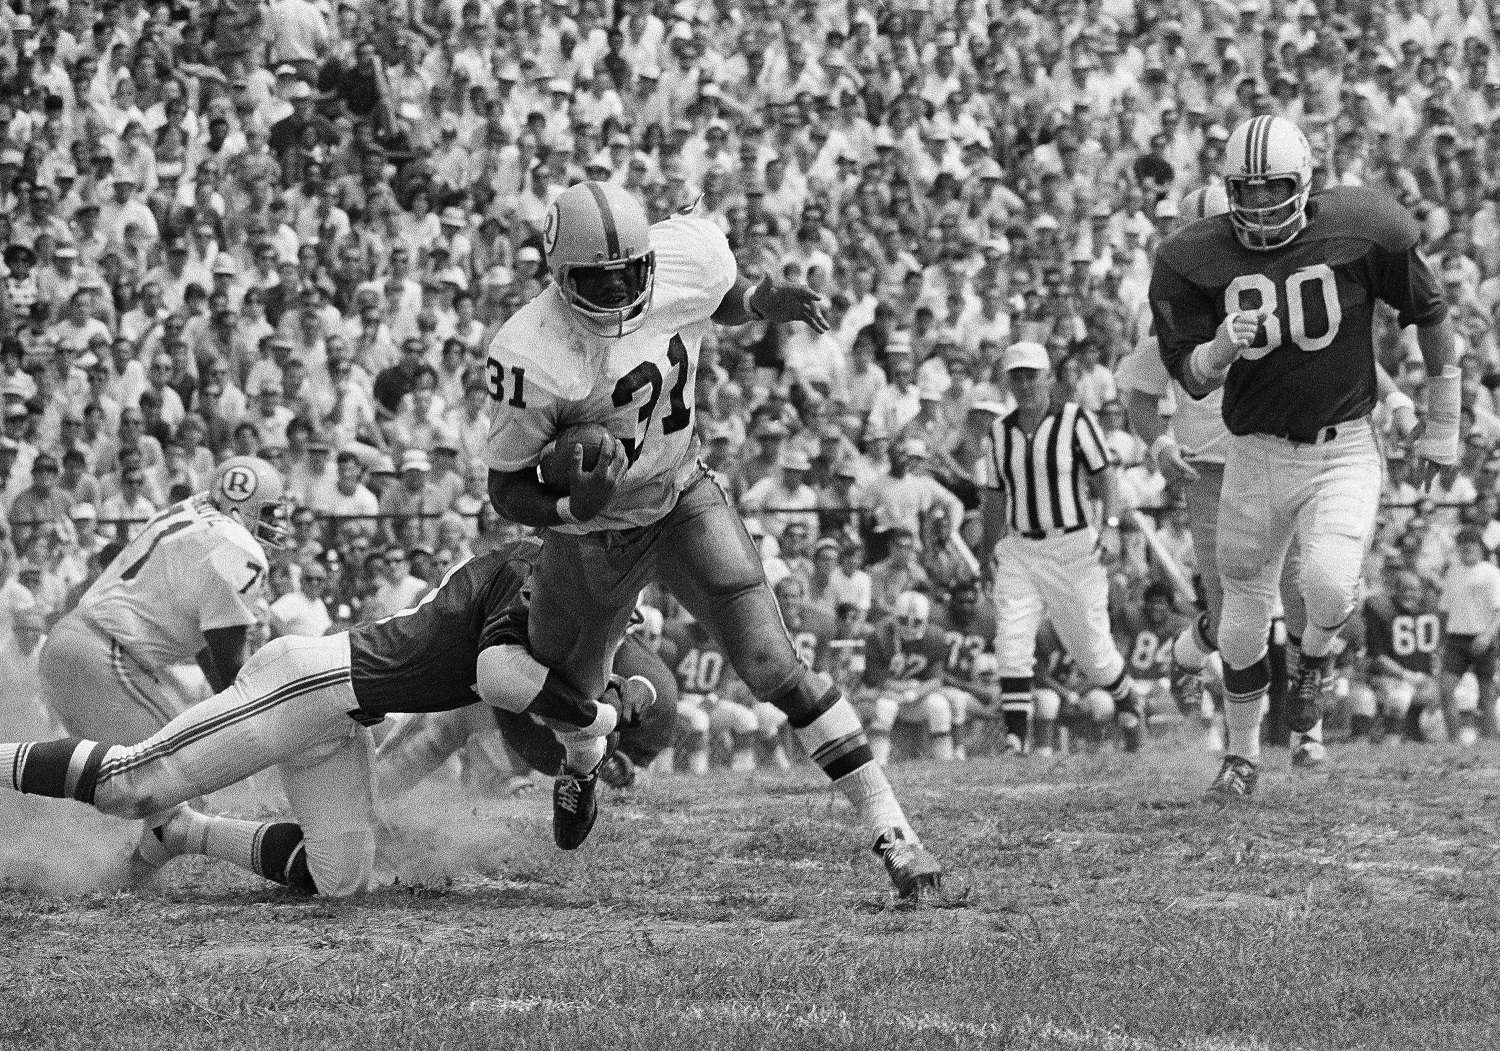 Charley Harraway (31), Washington Redskin back, takes a pass from Sonny Jurgensen and picks up five yards and a first down in the first period of their exhibition game with the Boston Patriots, Aug. 16, 1970, Newton, Mass. Aaron Marsh is the Patriot bringing him down with Spain Musgrove of the Redskins (71) in background. Washington won the game 45-21. (AP Photo)